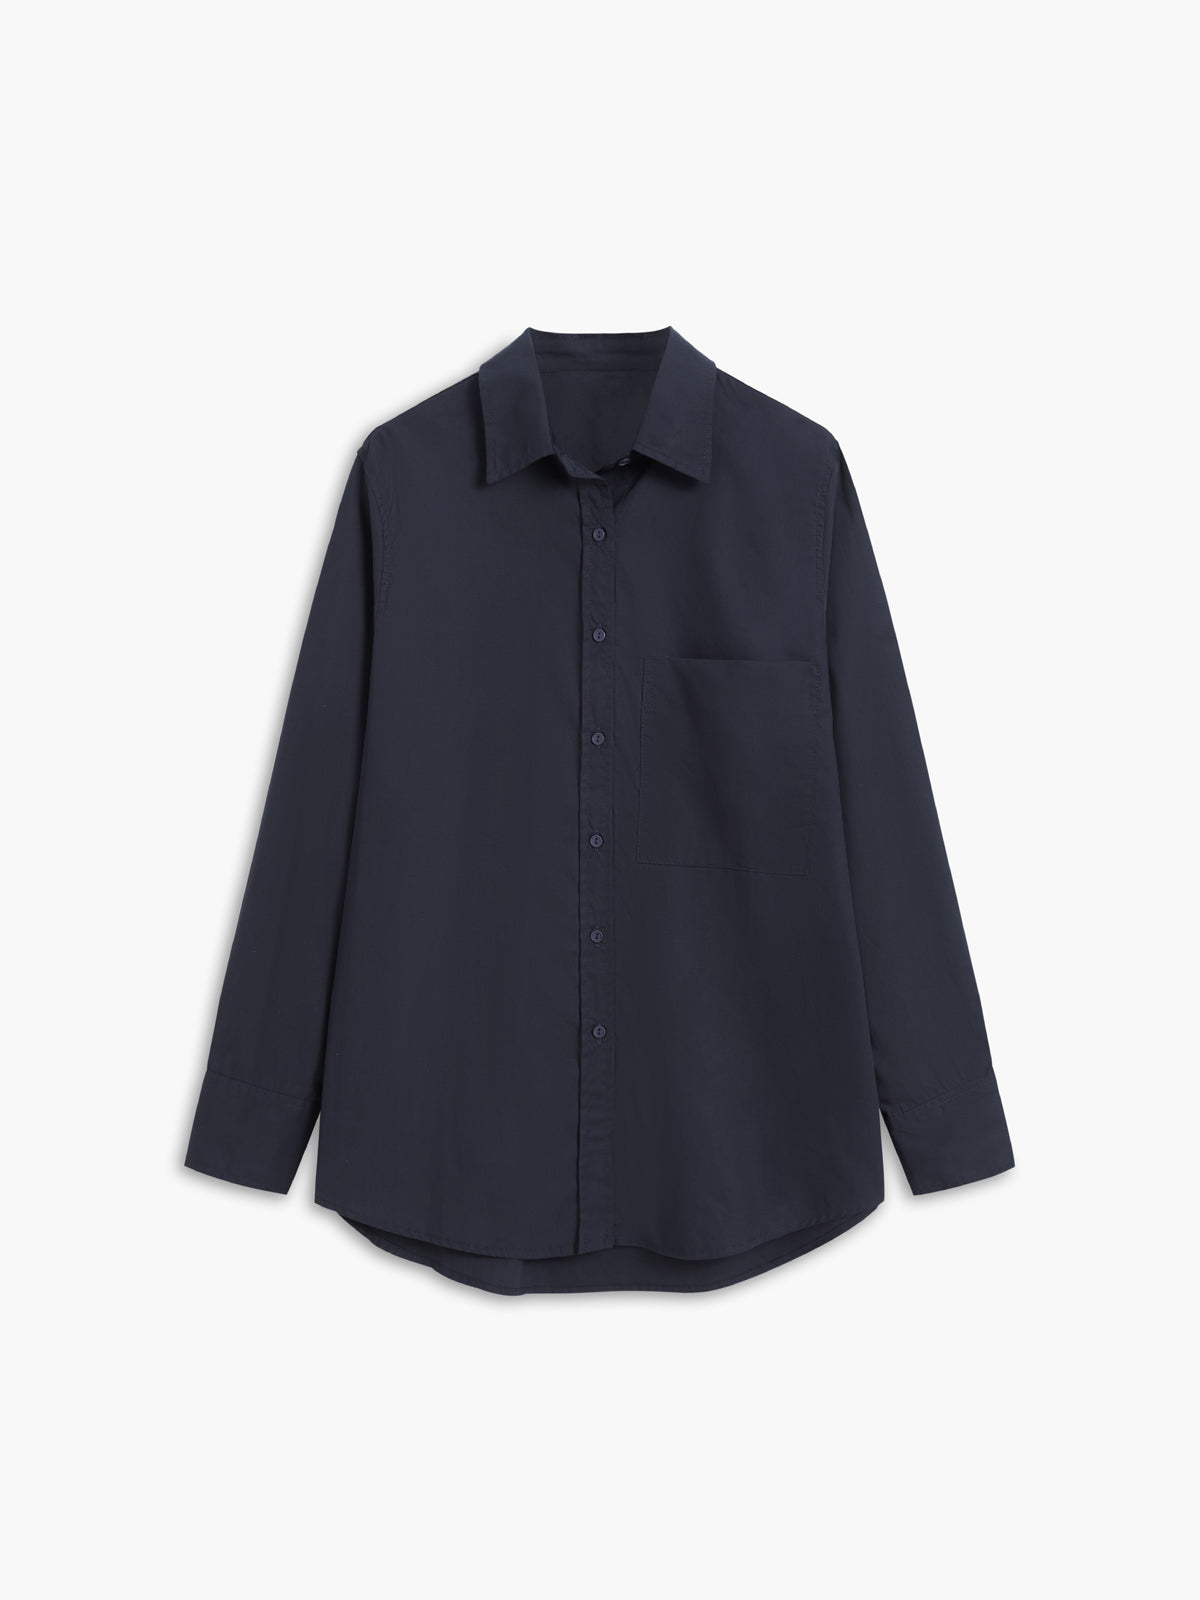 Everyday Leisure Button Down Shirt